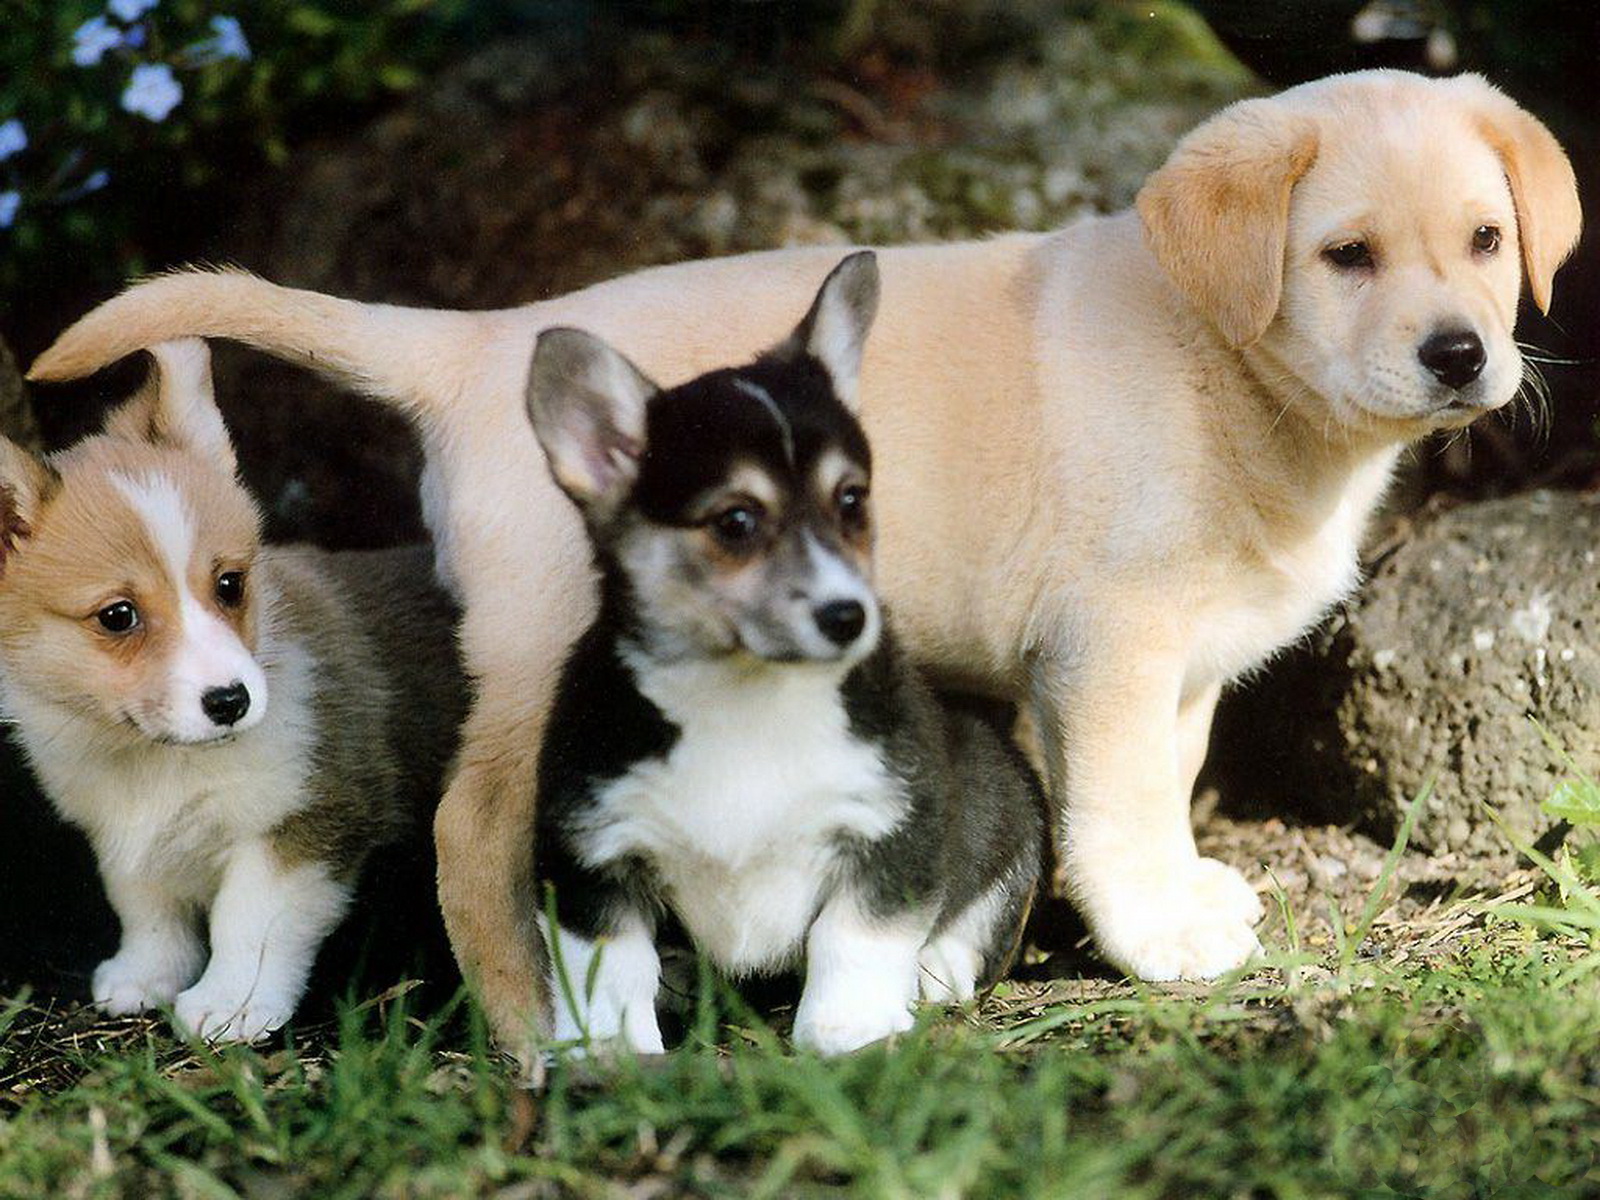 A Cute Puppy Wallpaper - Download Hd Images Of Dogs - HD Wallpaper 